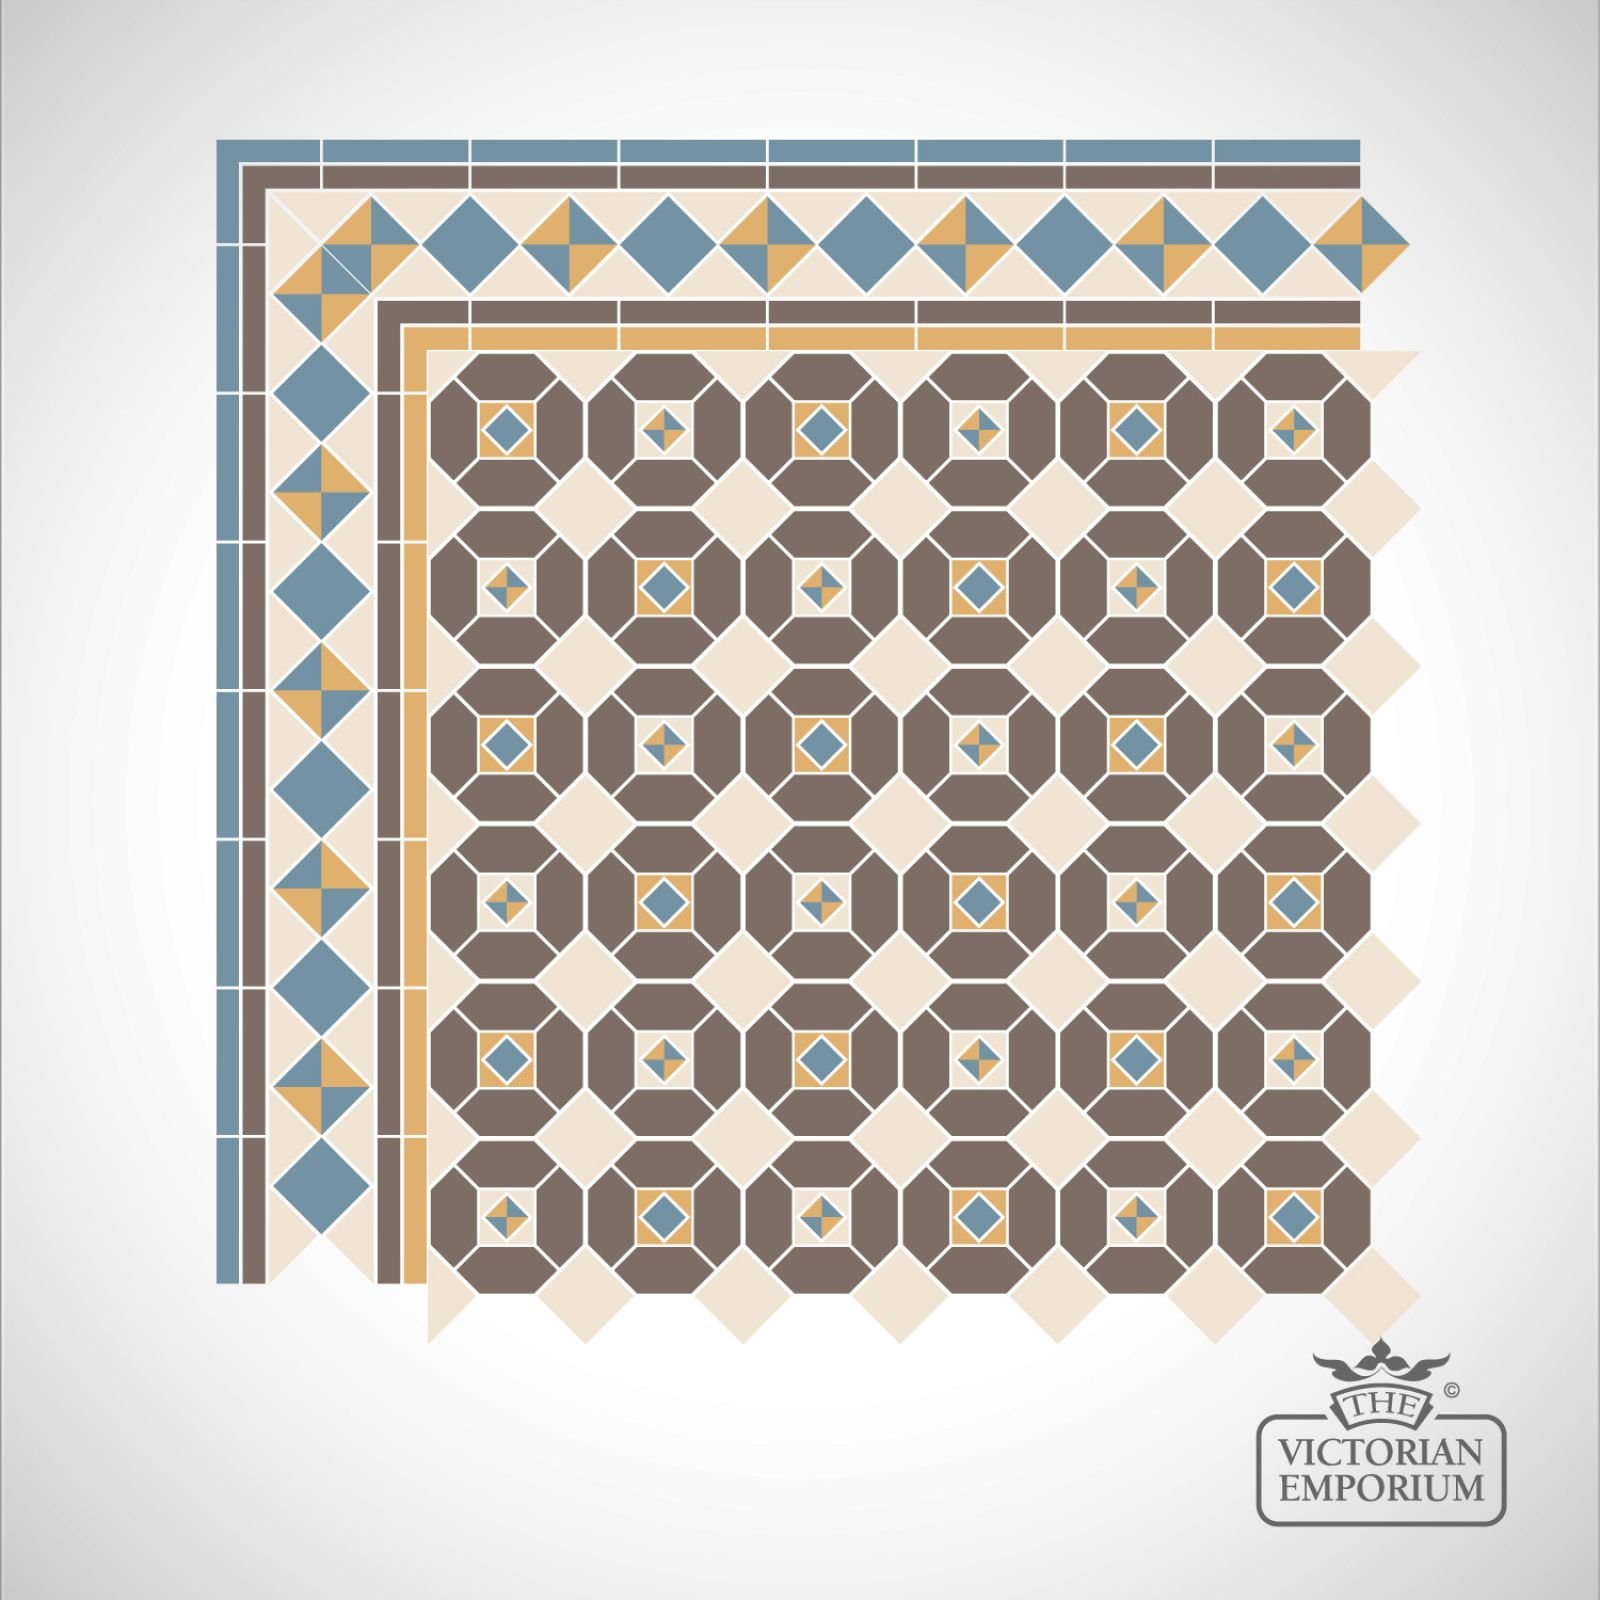 Kiev Victorian Mosaic Floor Tiles - Centre Pattern 295x295mm sheets for indoor and outdoor use